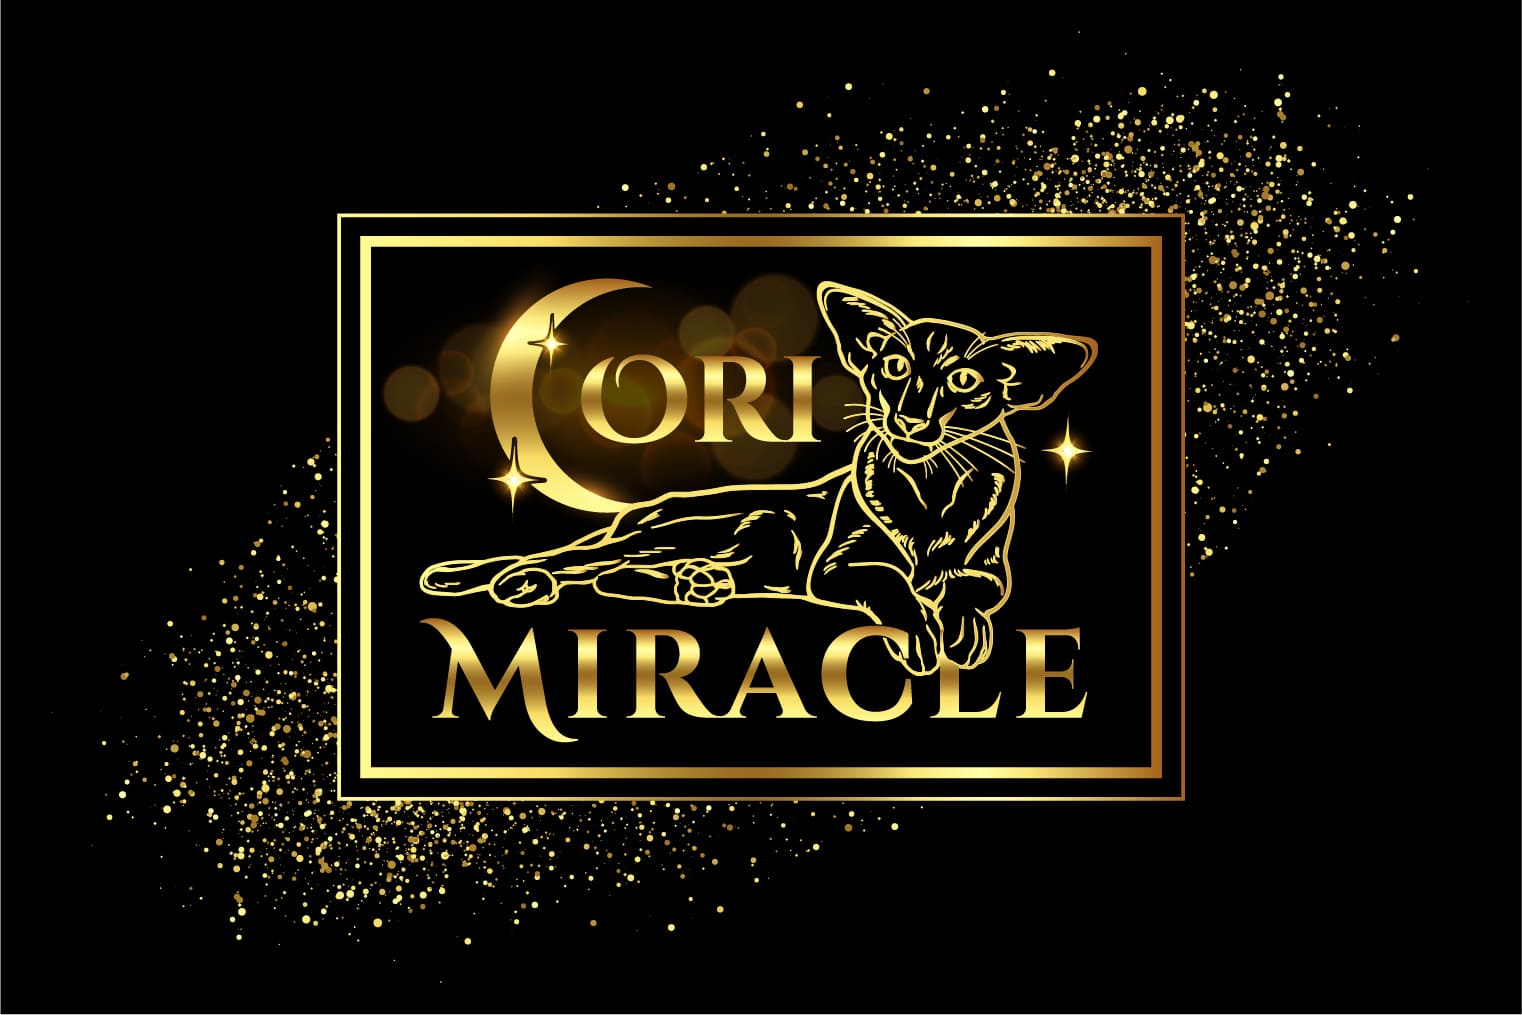 Oriental breed cattery logo "Ori Miracle"